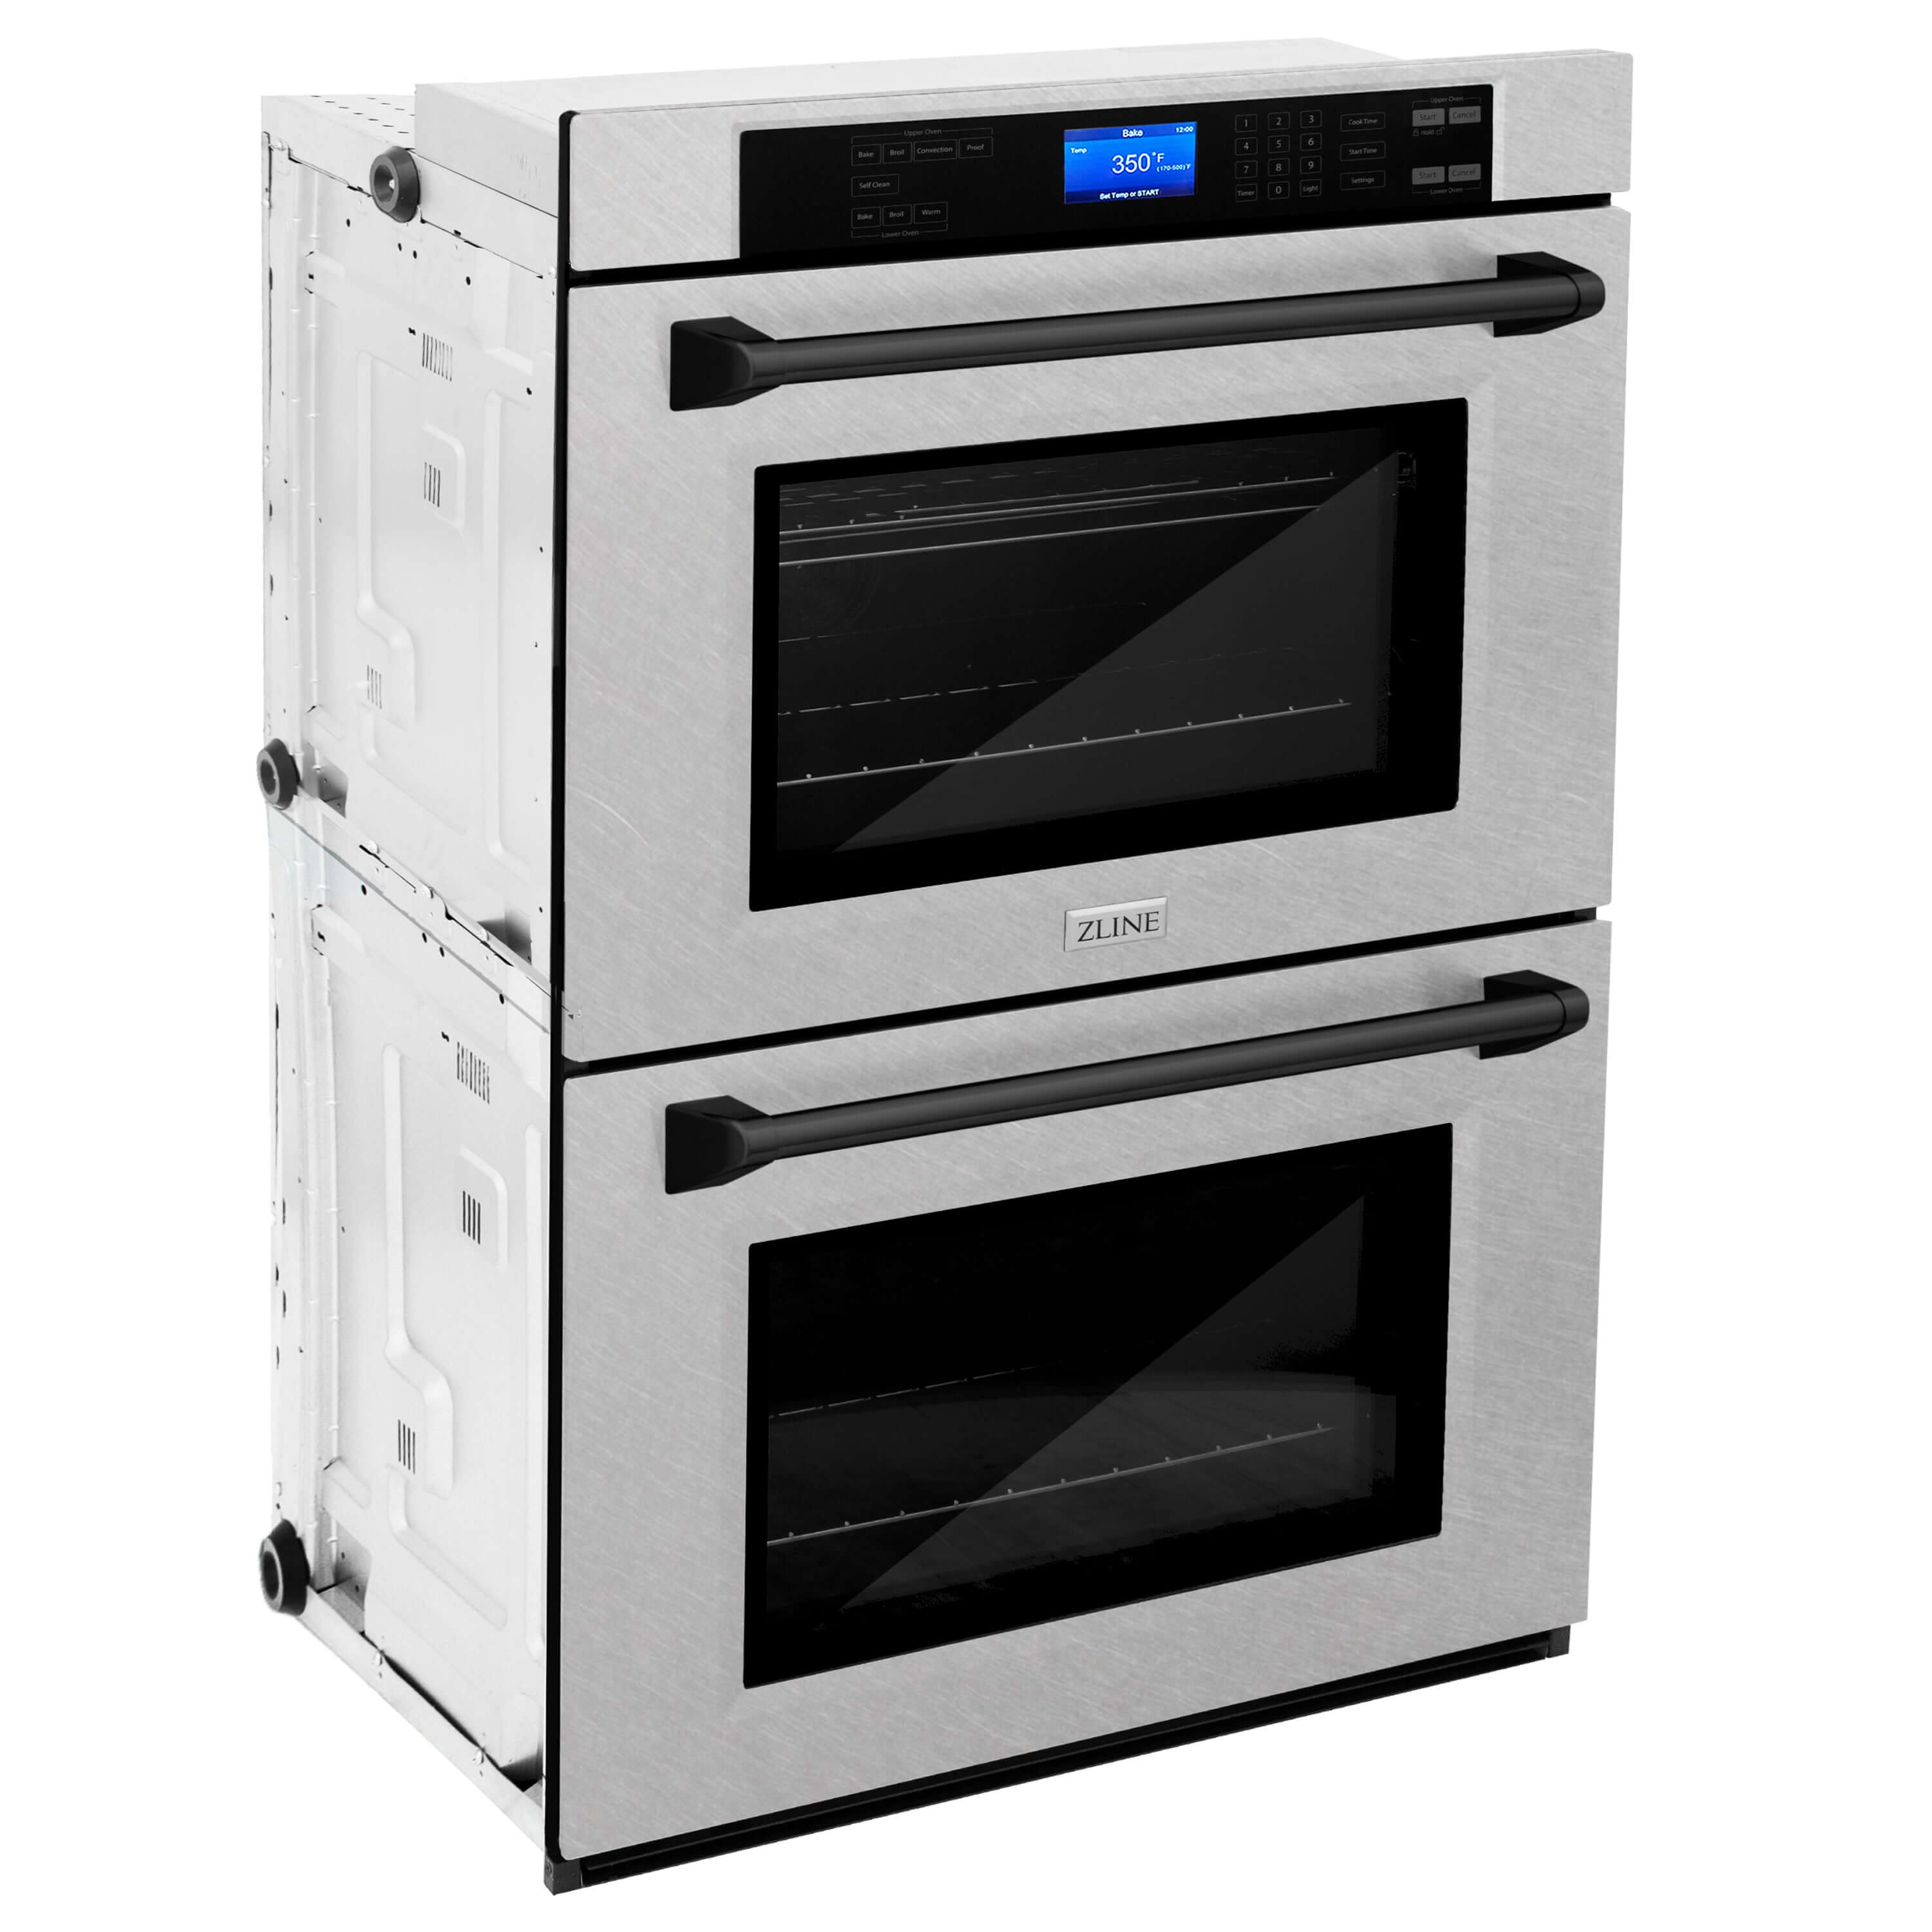 ZLINE Autograph Edition 30 in. Electric Double Wall Oven with Self Clean and True Convection in DuraSnow Stainless Steel and Matte Black Accents (AWDSZ-30-MB) side, oven closed.